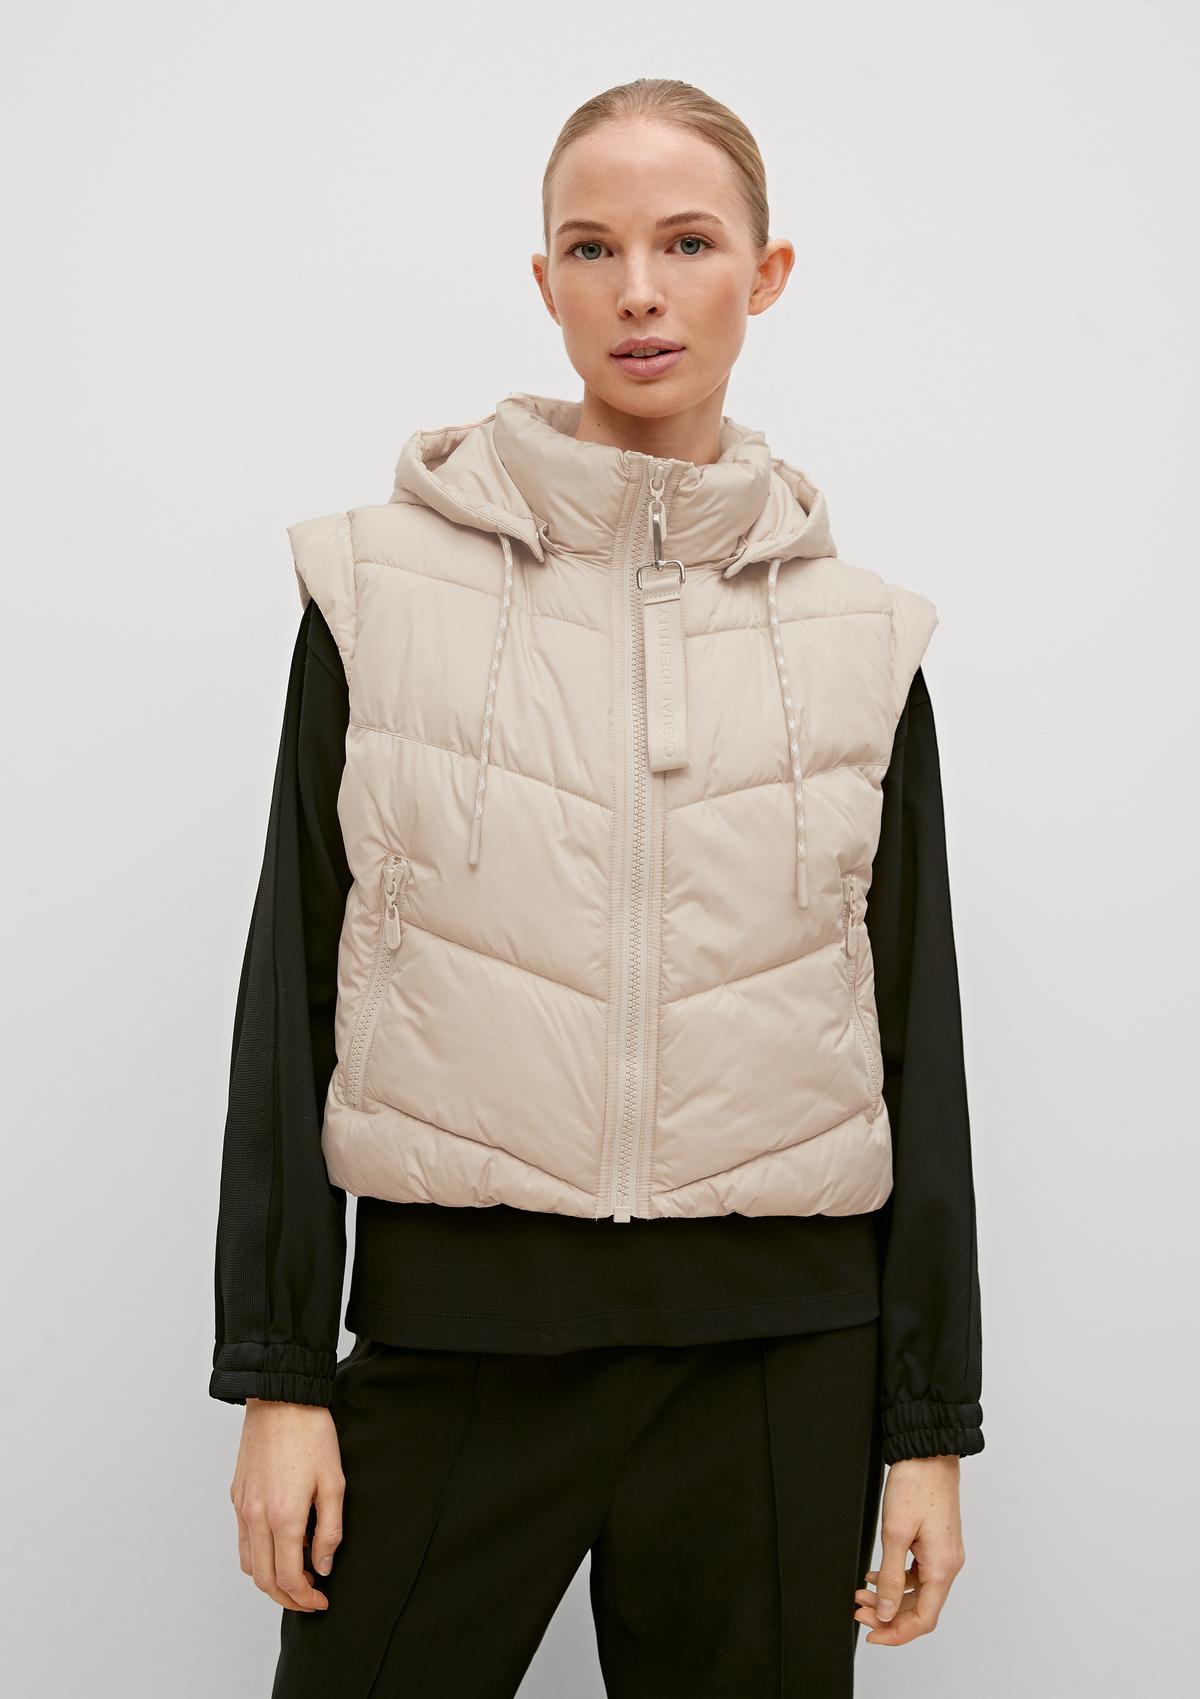 Quilted body warmer with a detachable hood